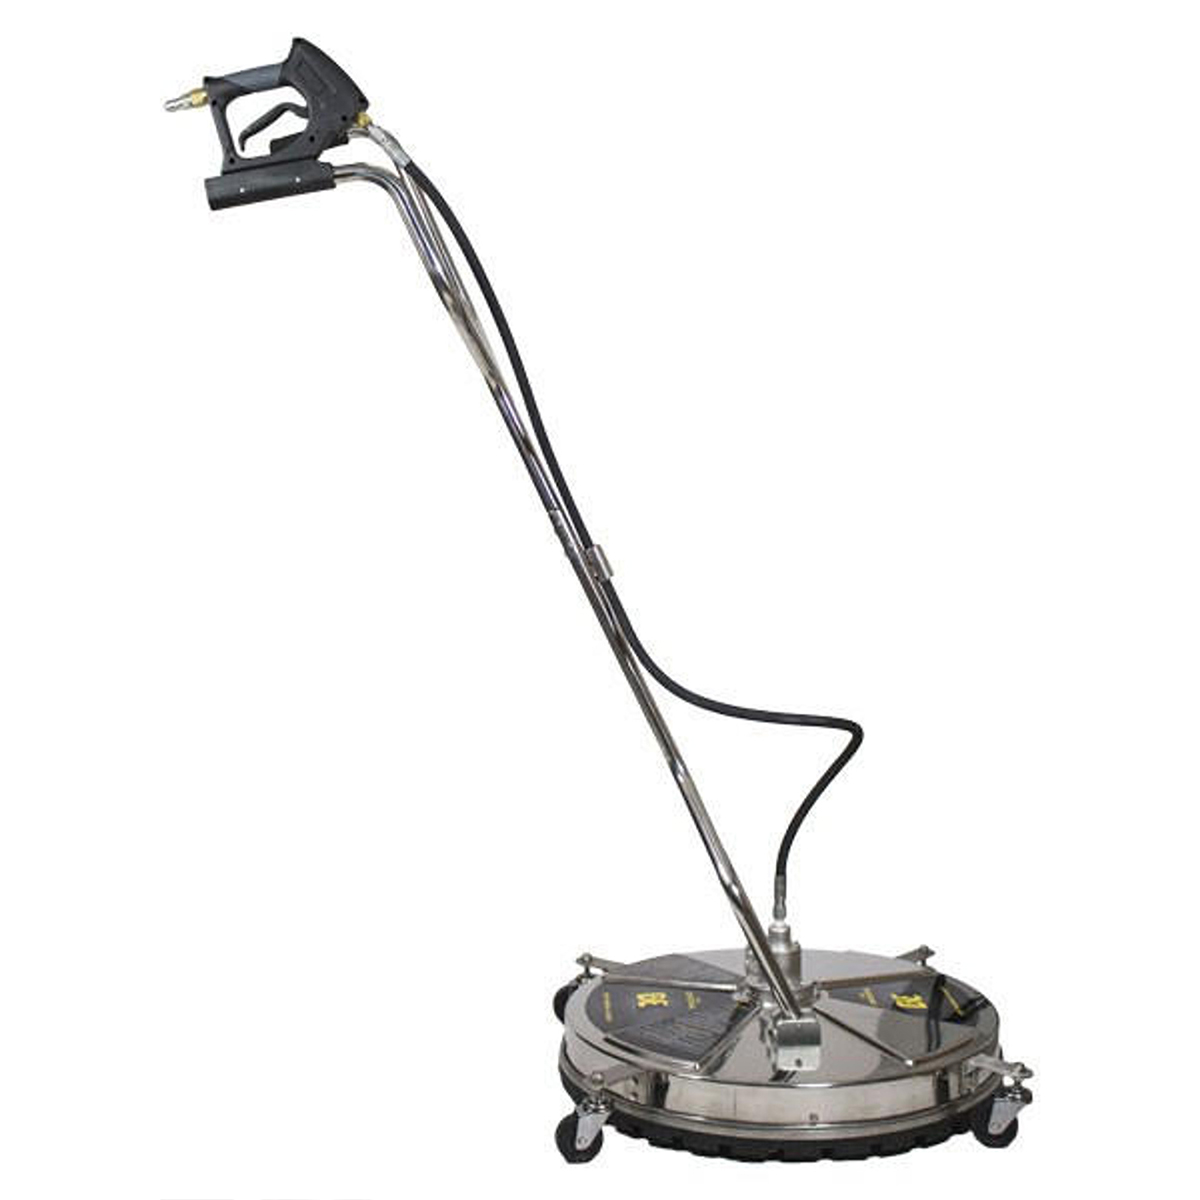 BE-85.403.010-Pressure-Whirlaway-20-inch-Stainless-Steel-Rotary-Surface-Cleaner-With-Castor-Wheels-side